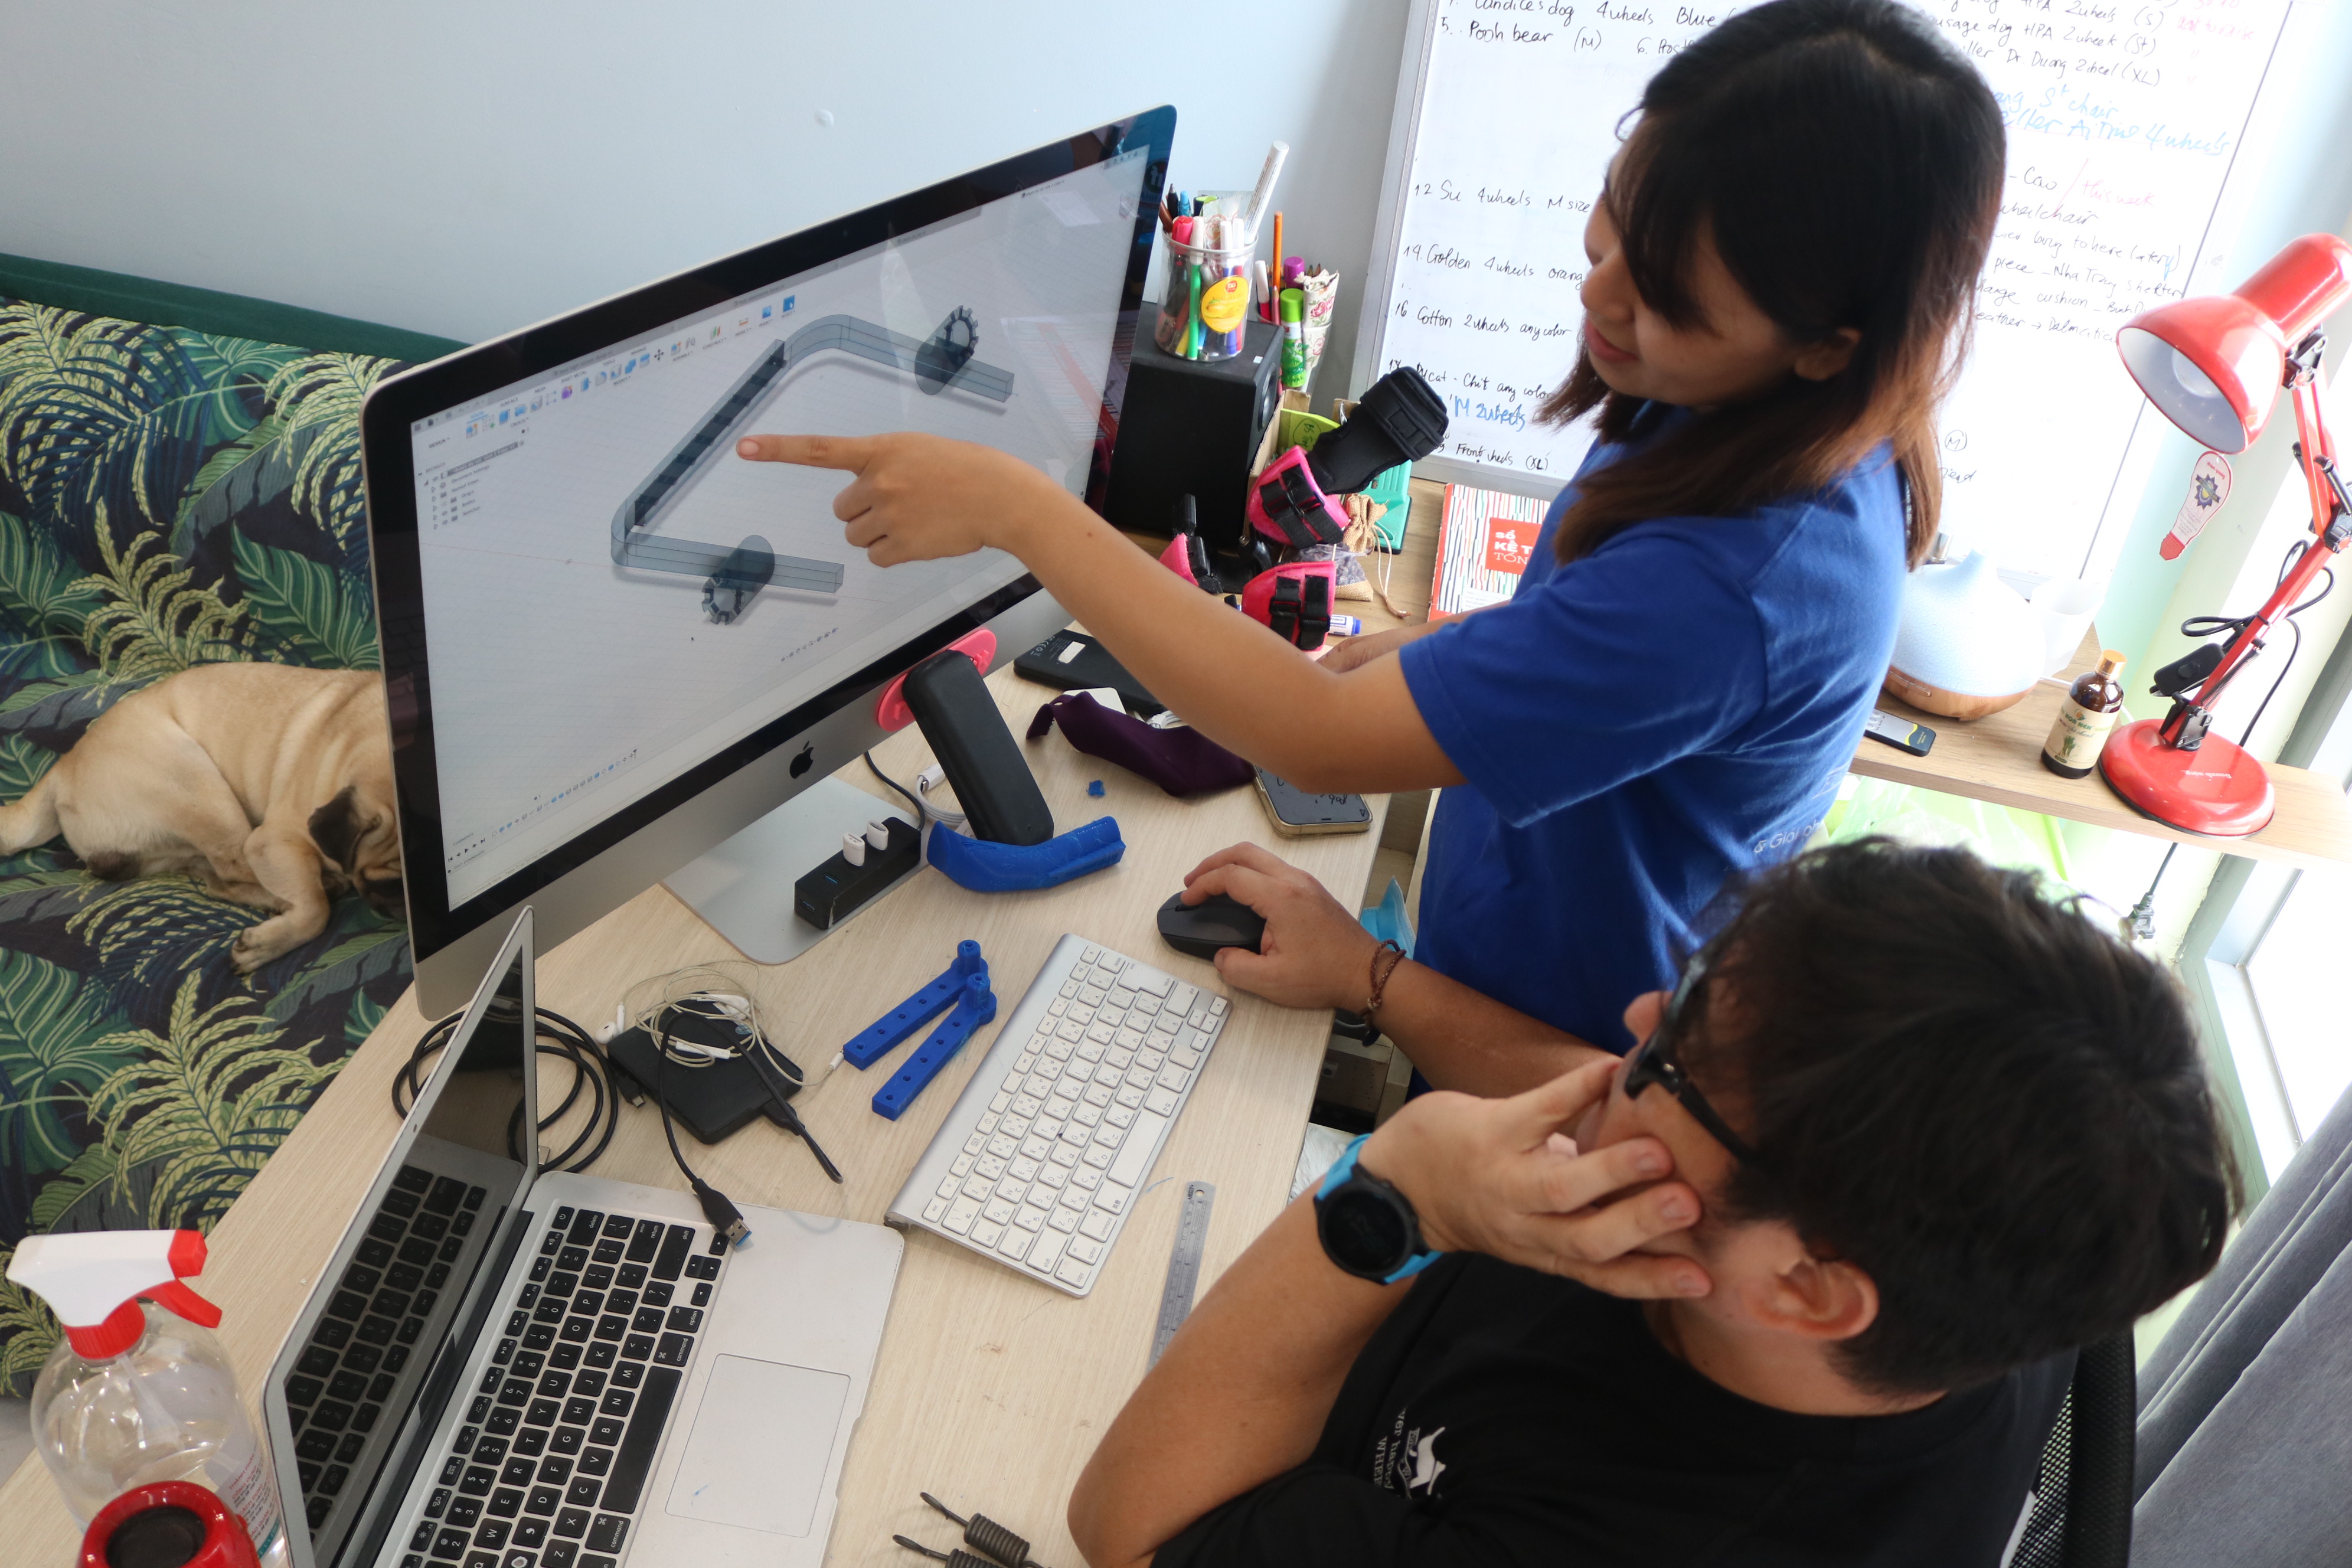 Oscar Fernando Ruiz Bonilla and wife Tran Anh Thu are working on a 3D design at Forever Wheelchair workshop in Ho Chi Minh City’s District 9 on October 19, 2021. Photo: Hoang An / Tuoi Tre